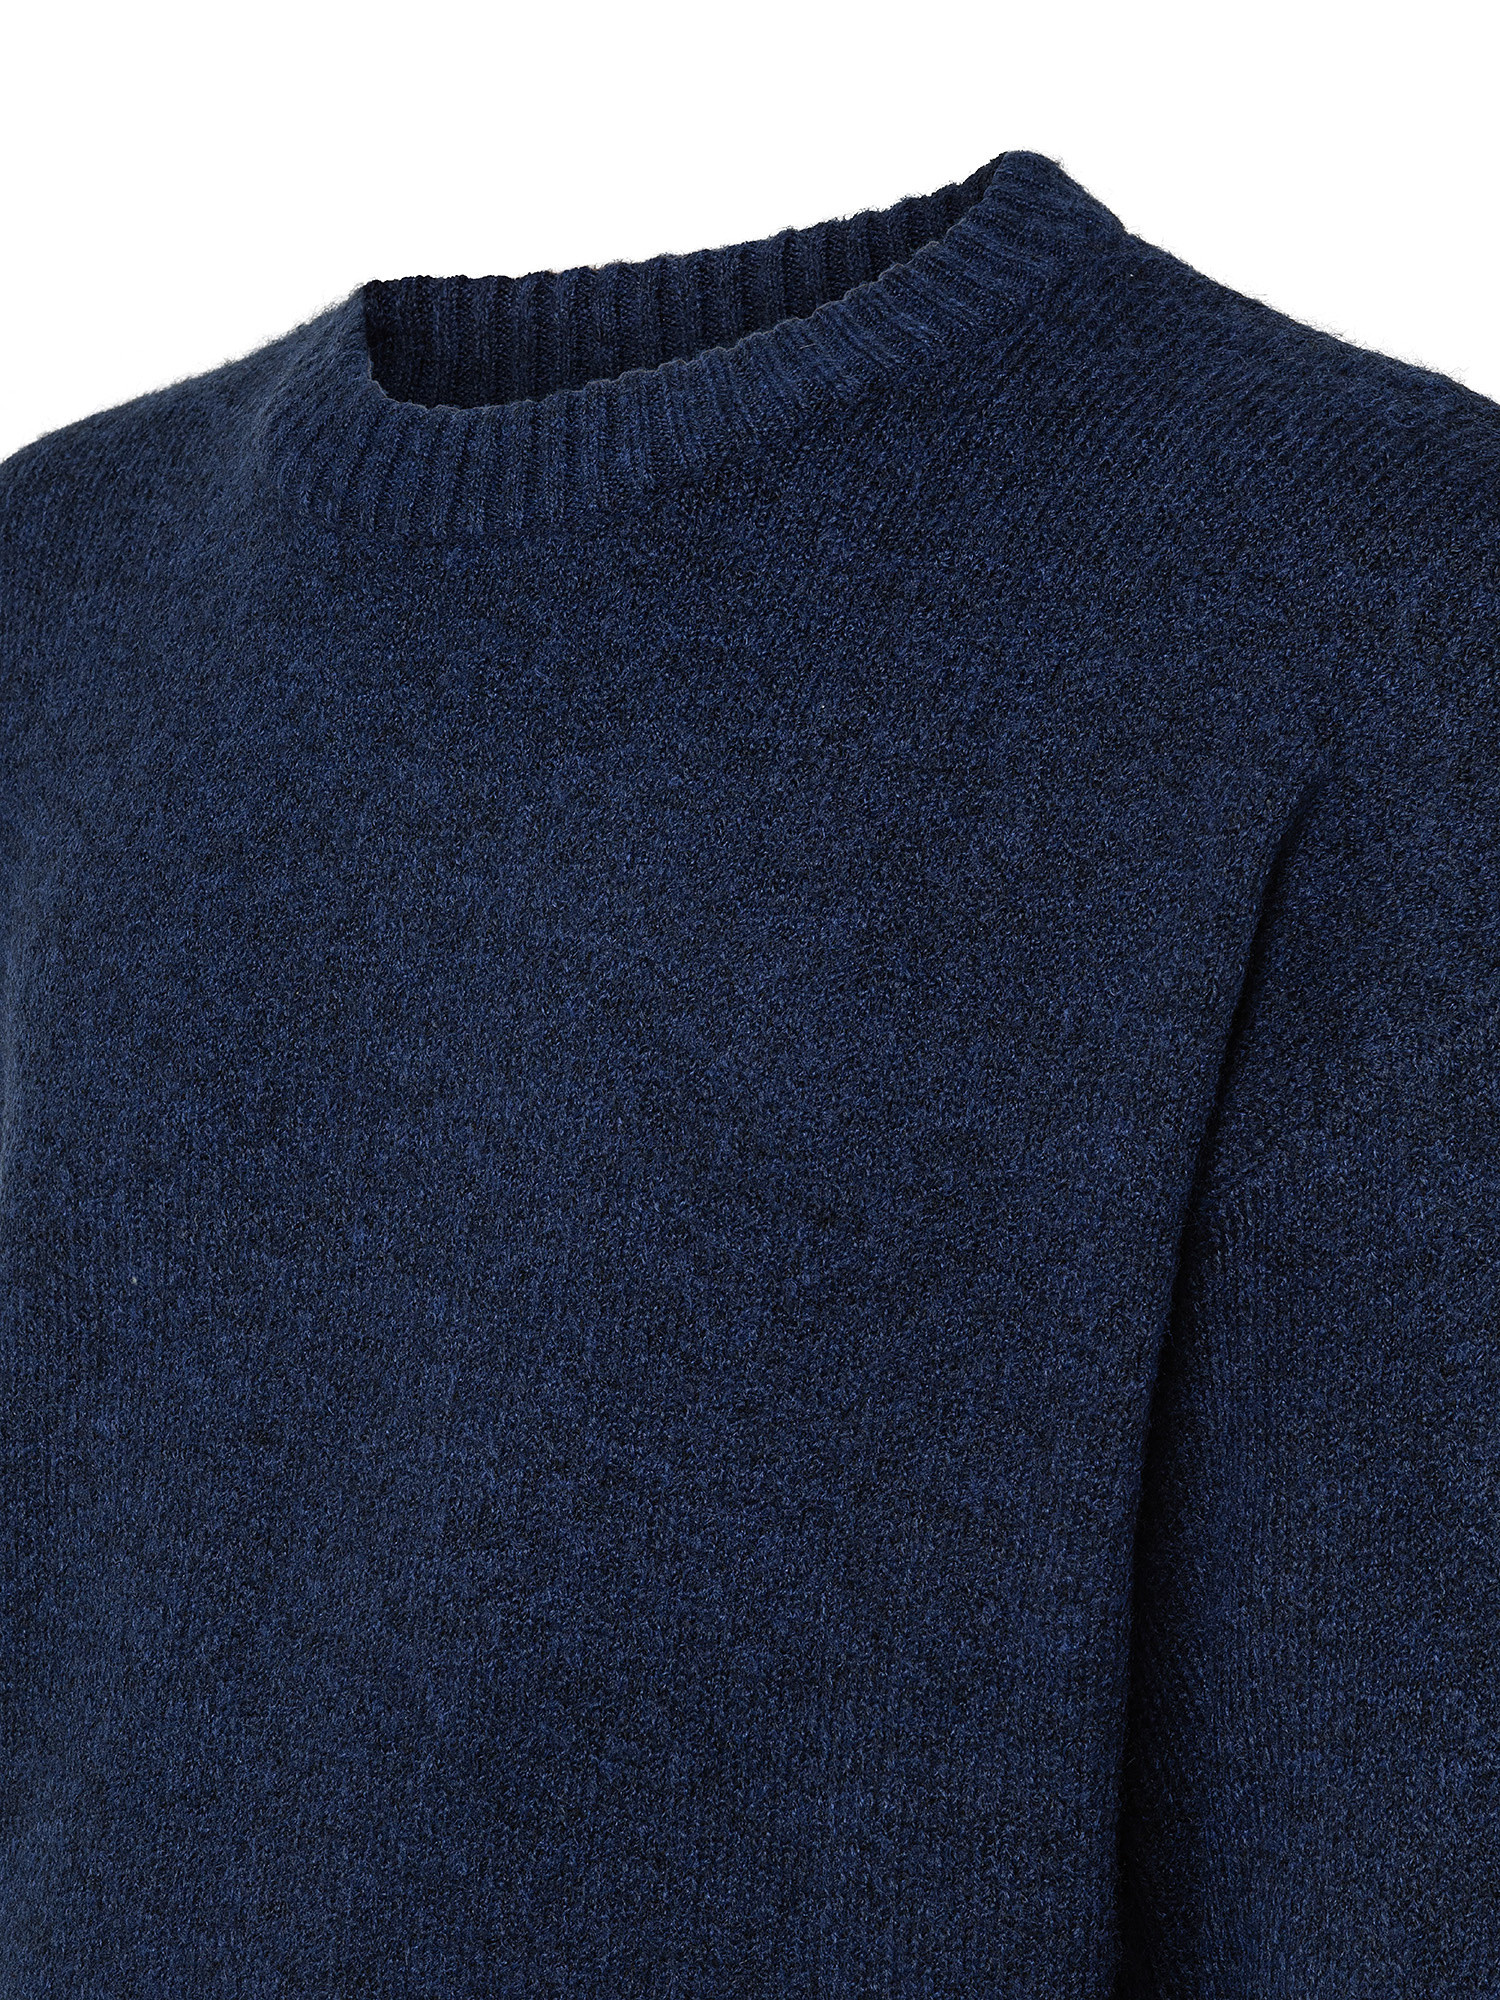 Pullover with long sleeves, Blue, large image number 2